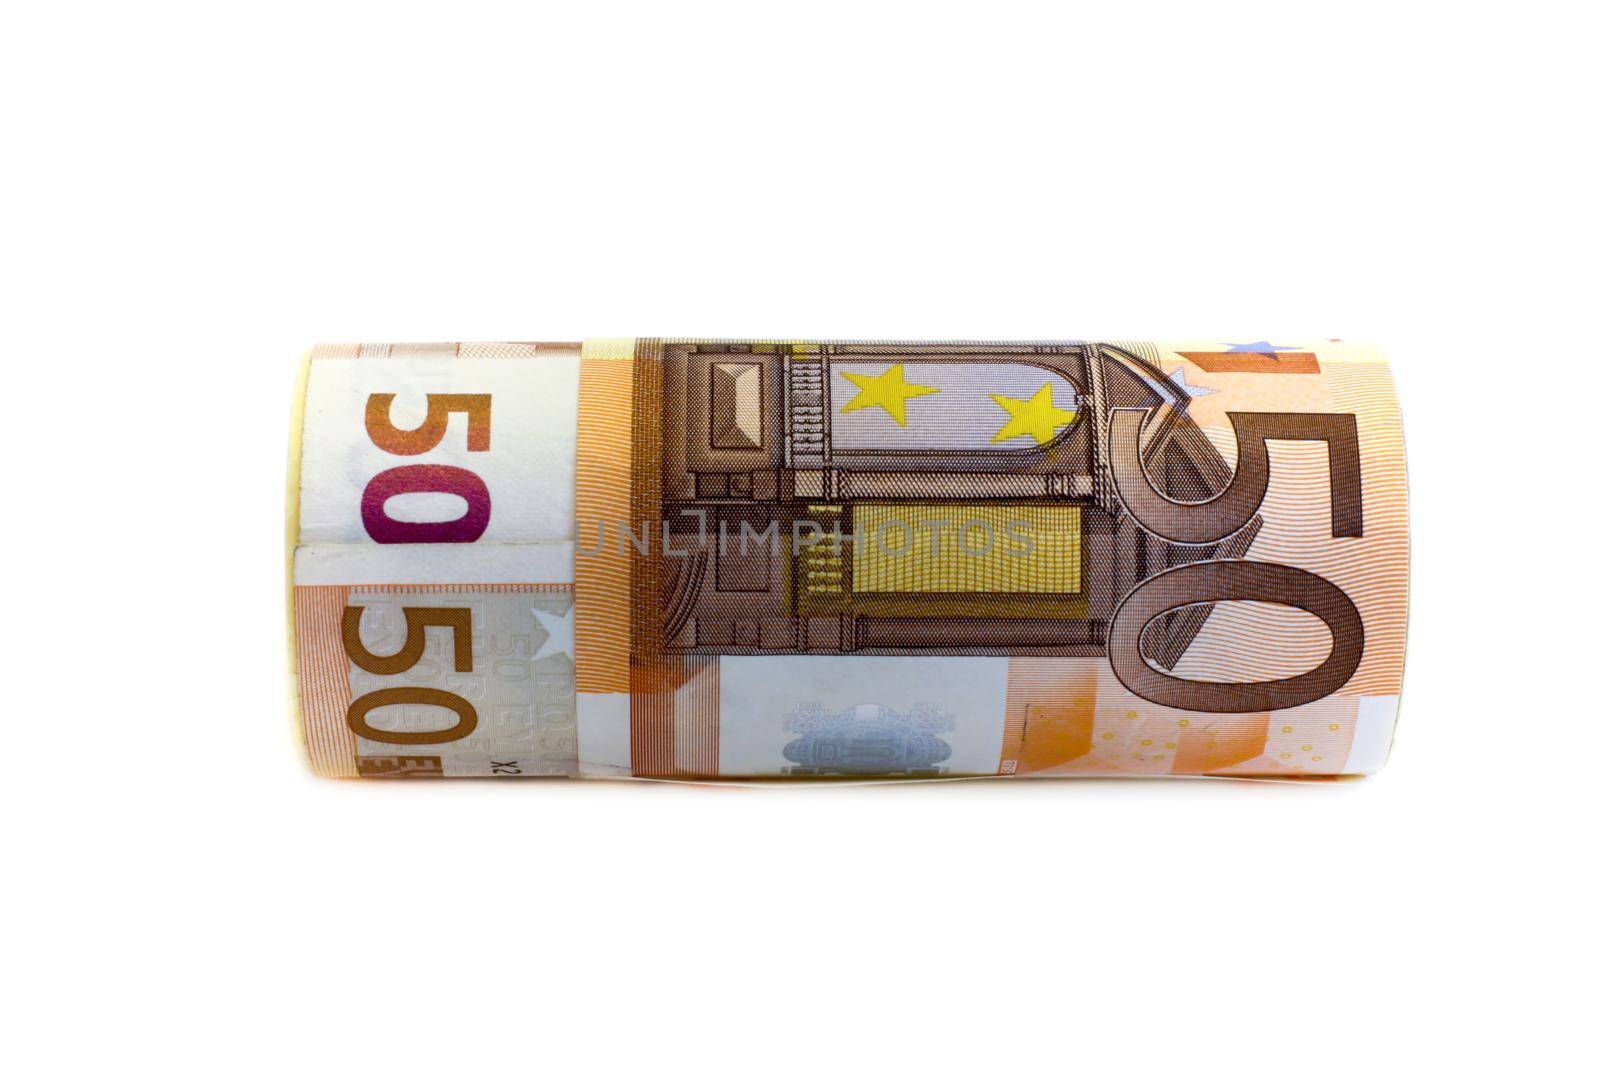 Monetary denominations advantage 50 euros on a white background by client111